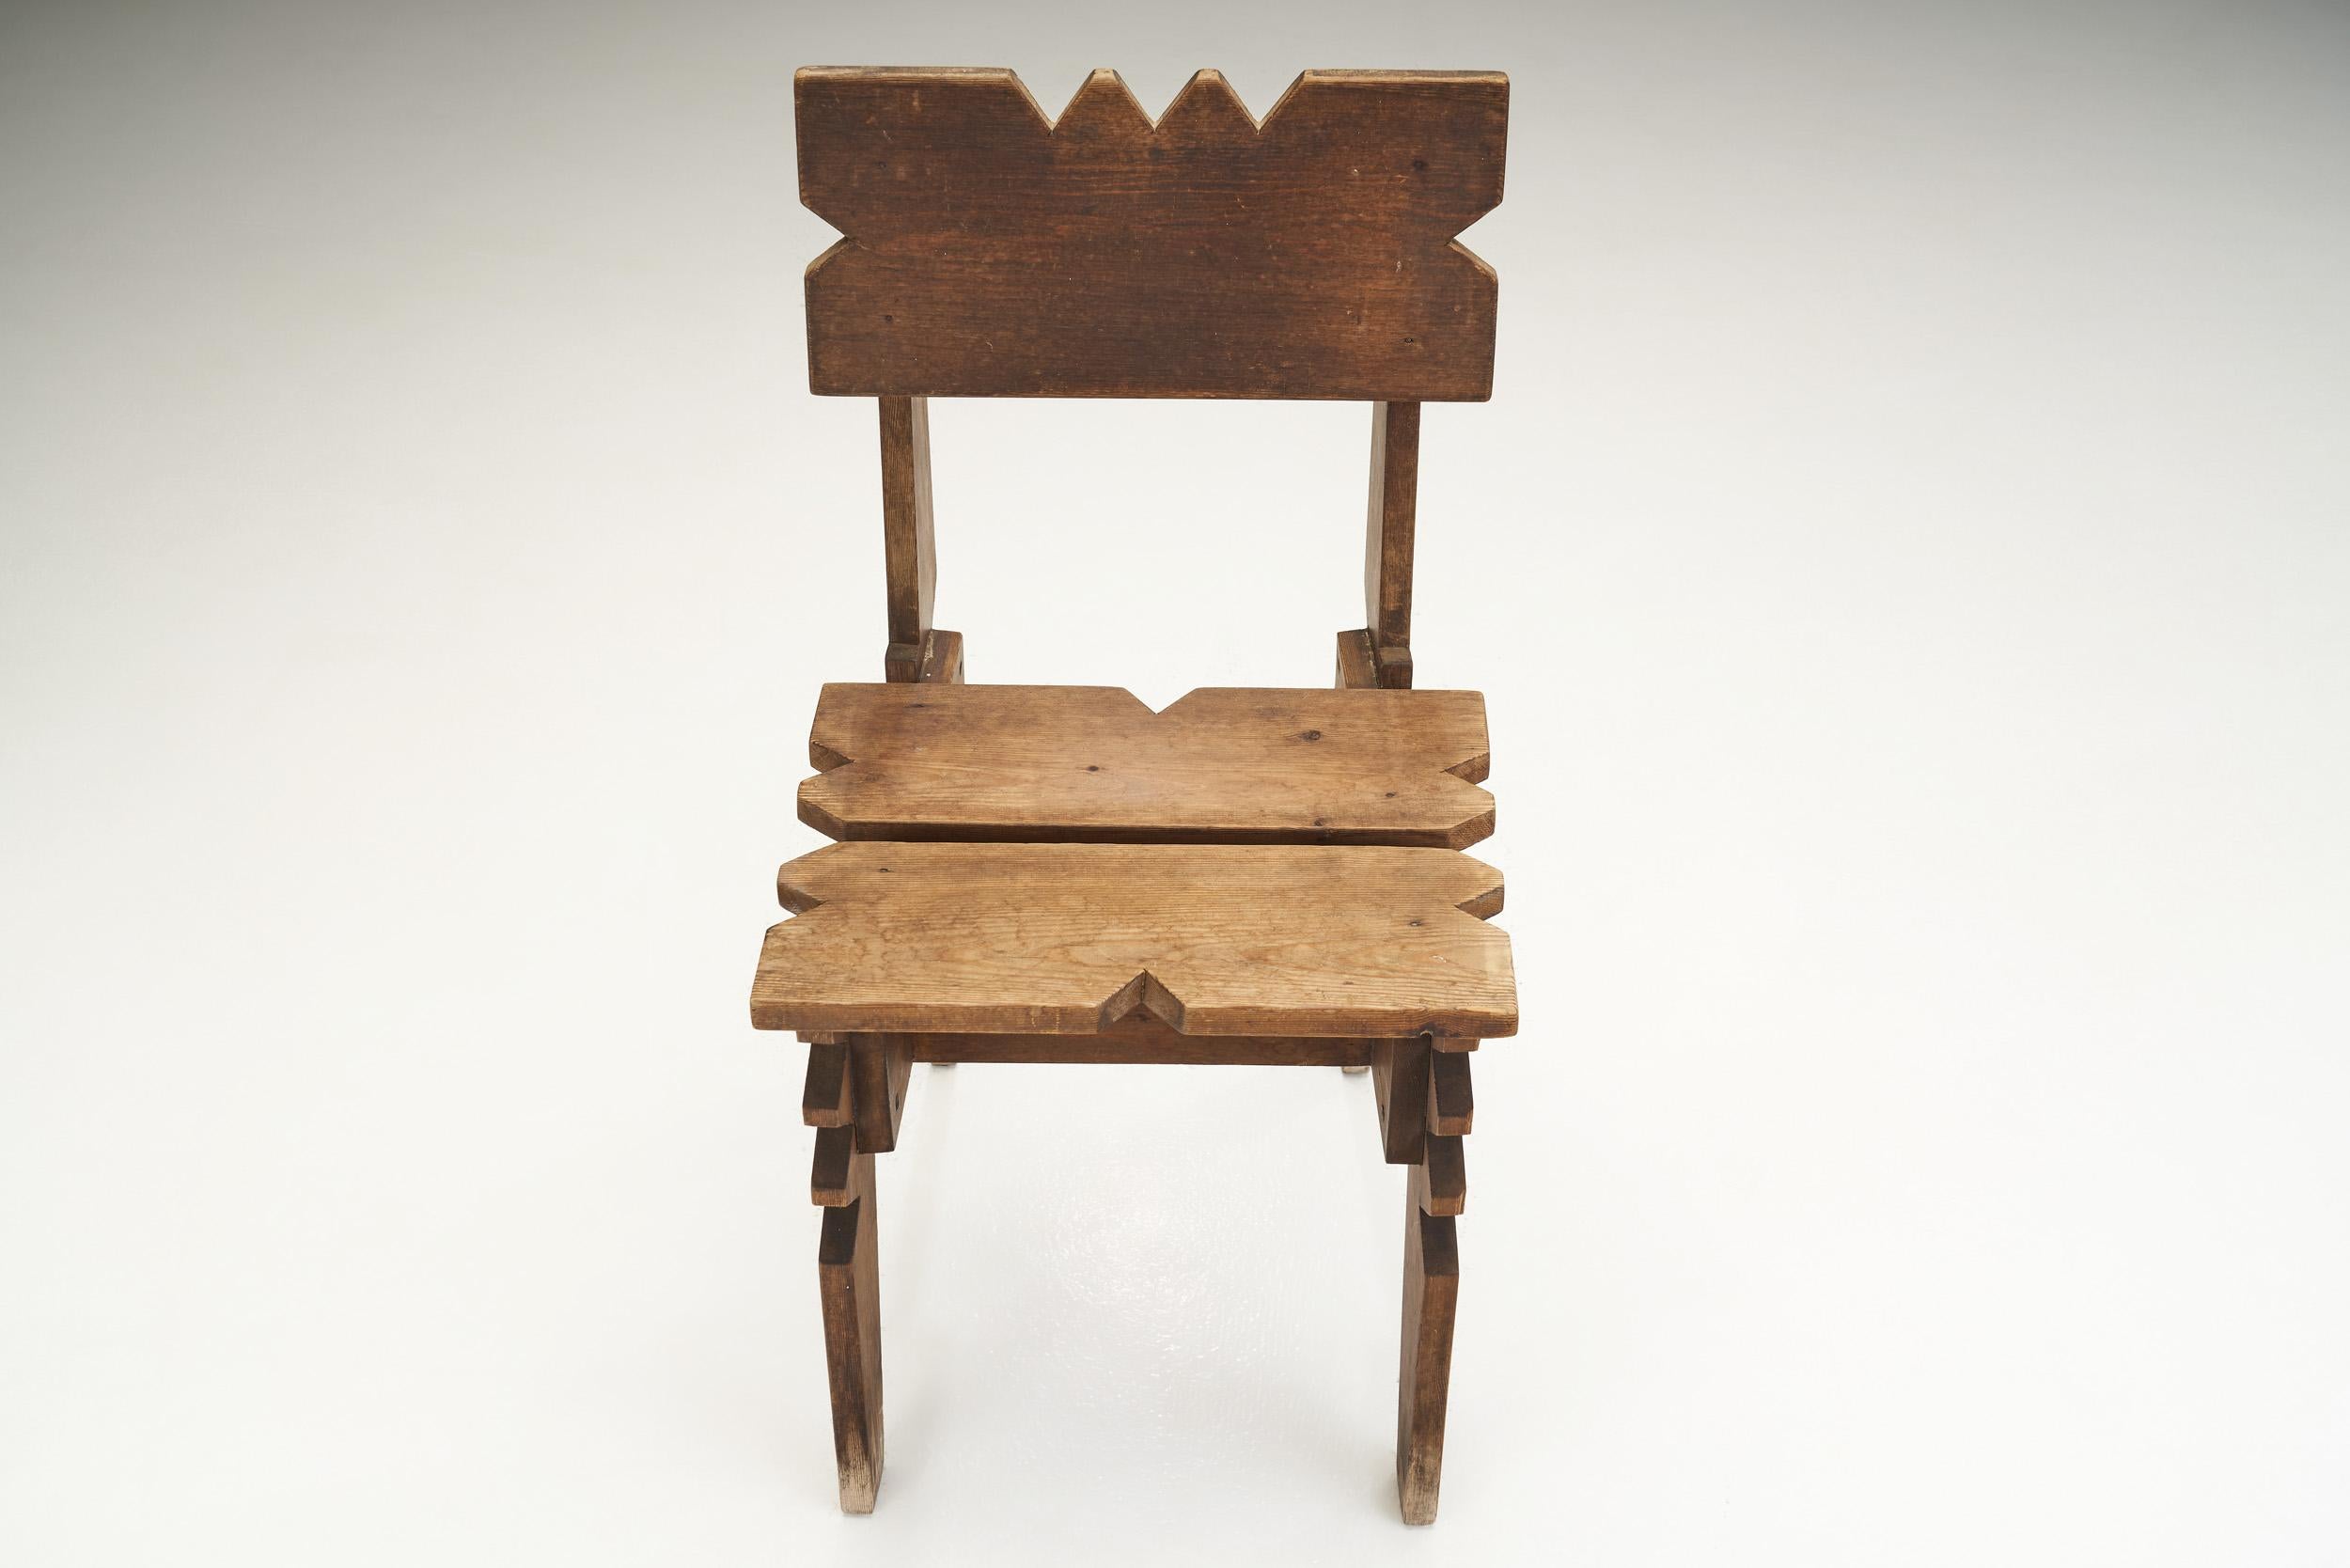 Carved Natural Wood Chair from François Catroux Collection, France 20th Century 1